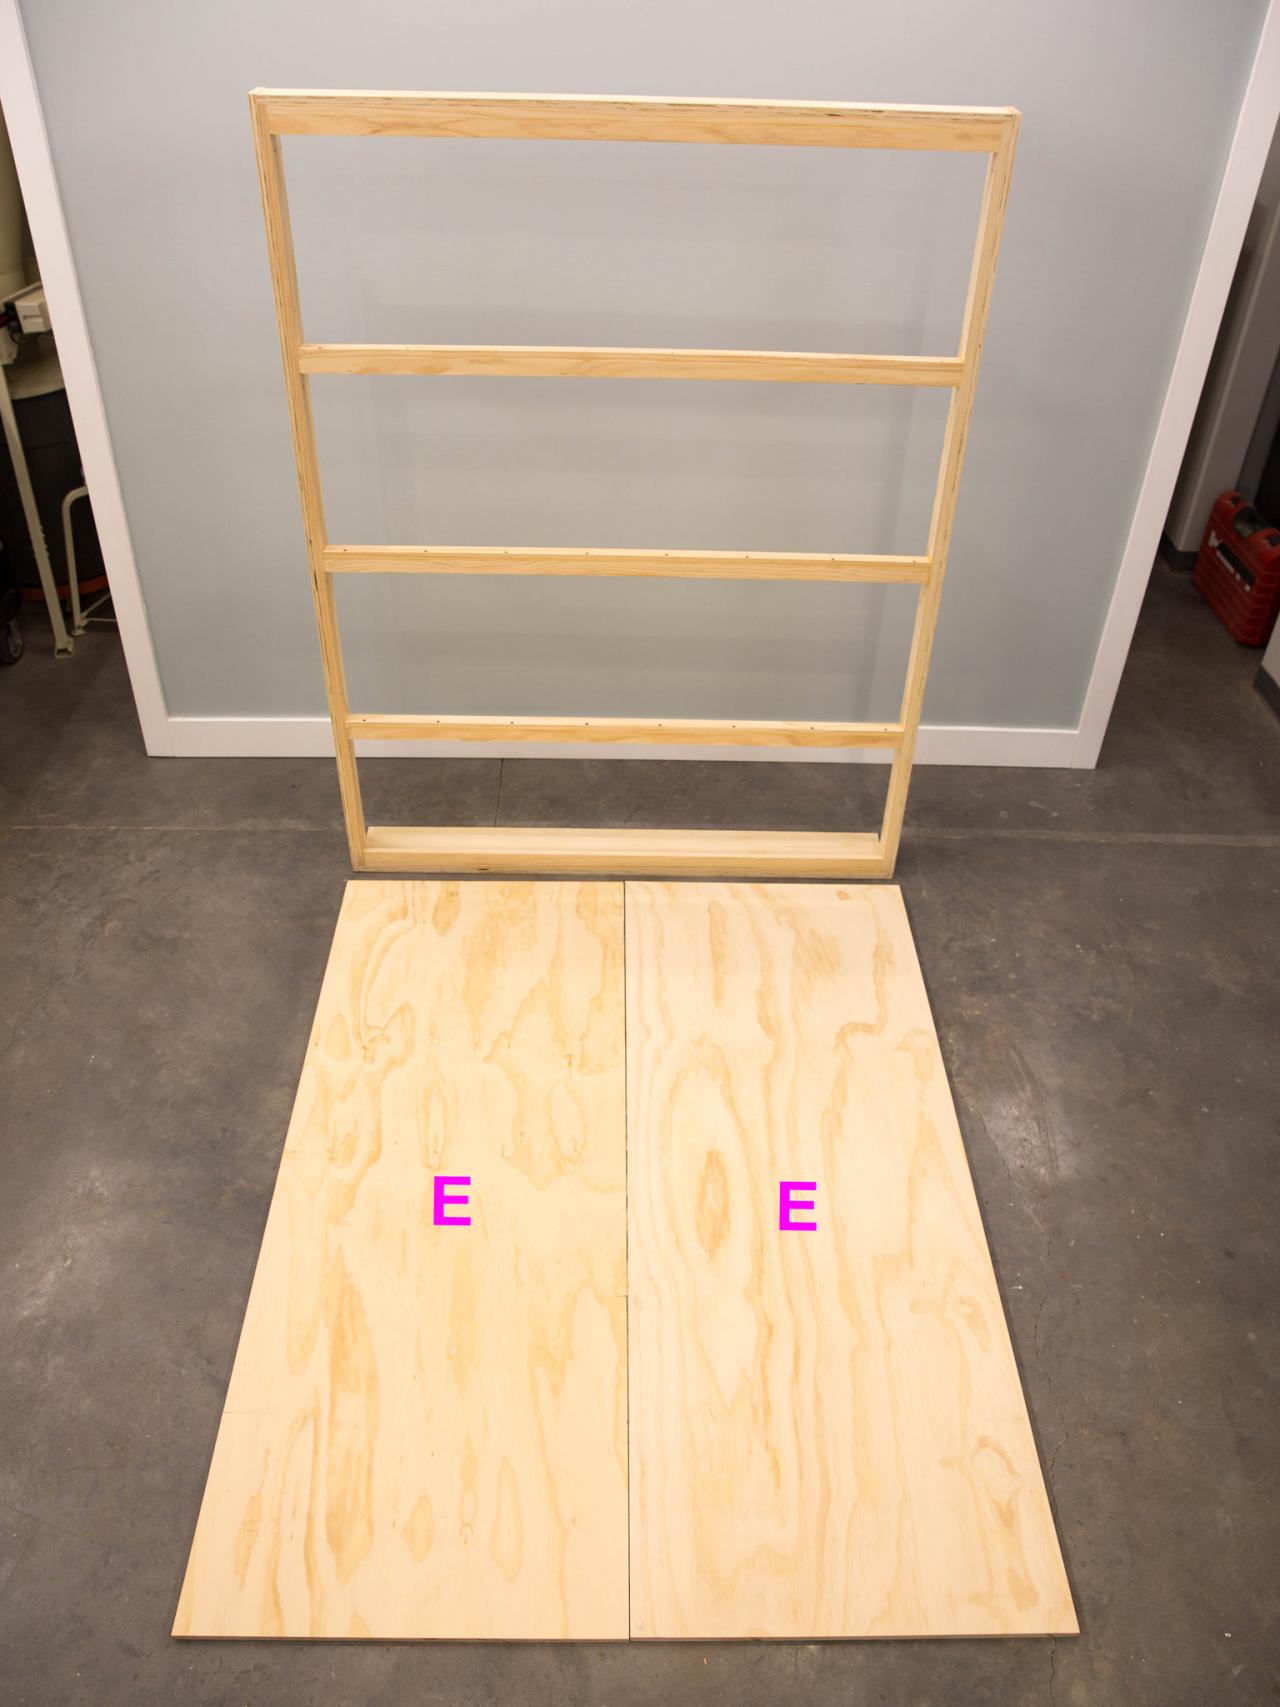 How To Build A Murphy Bed, How To Build Murphy Bed Free Plans